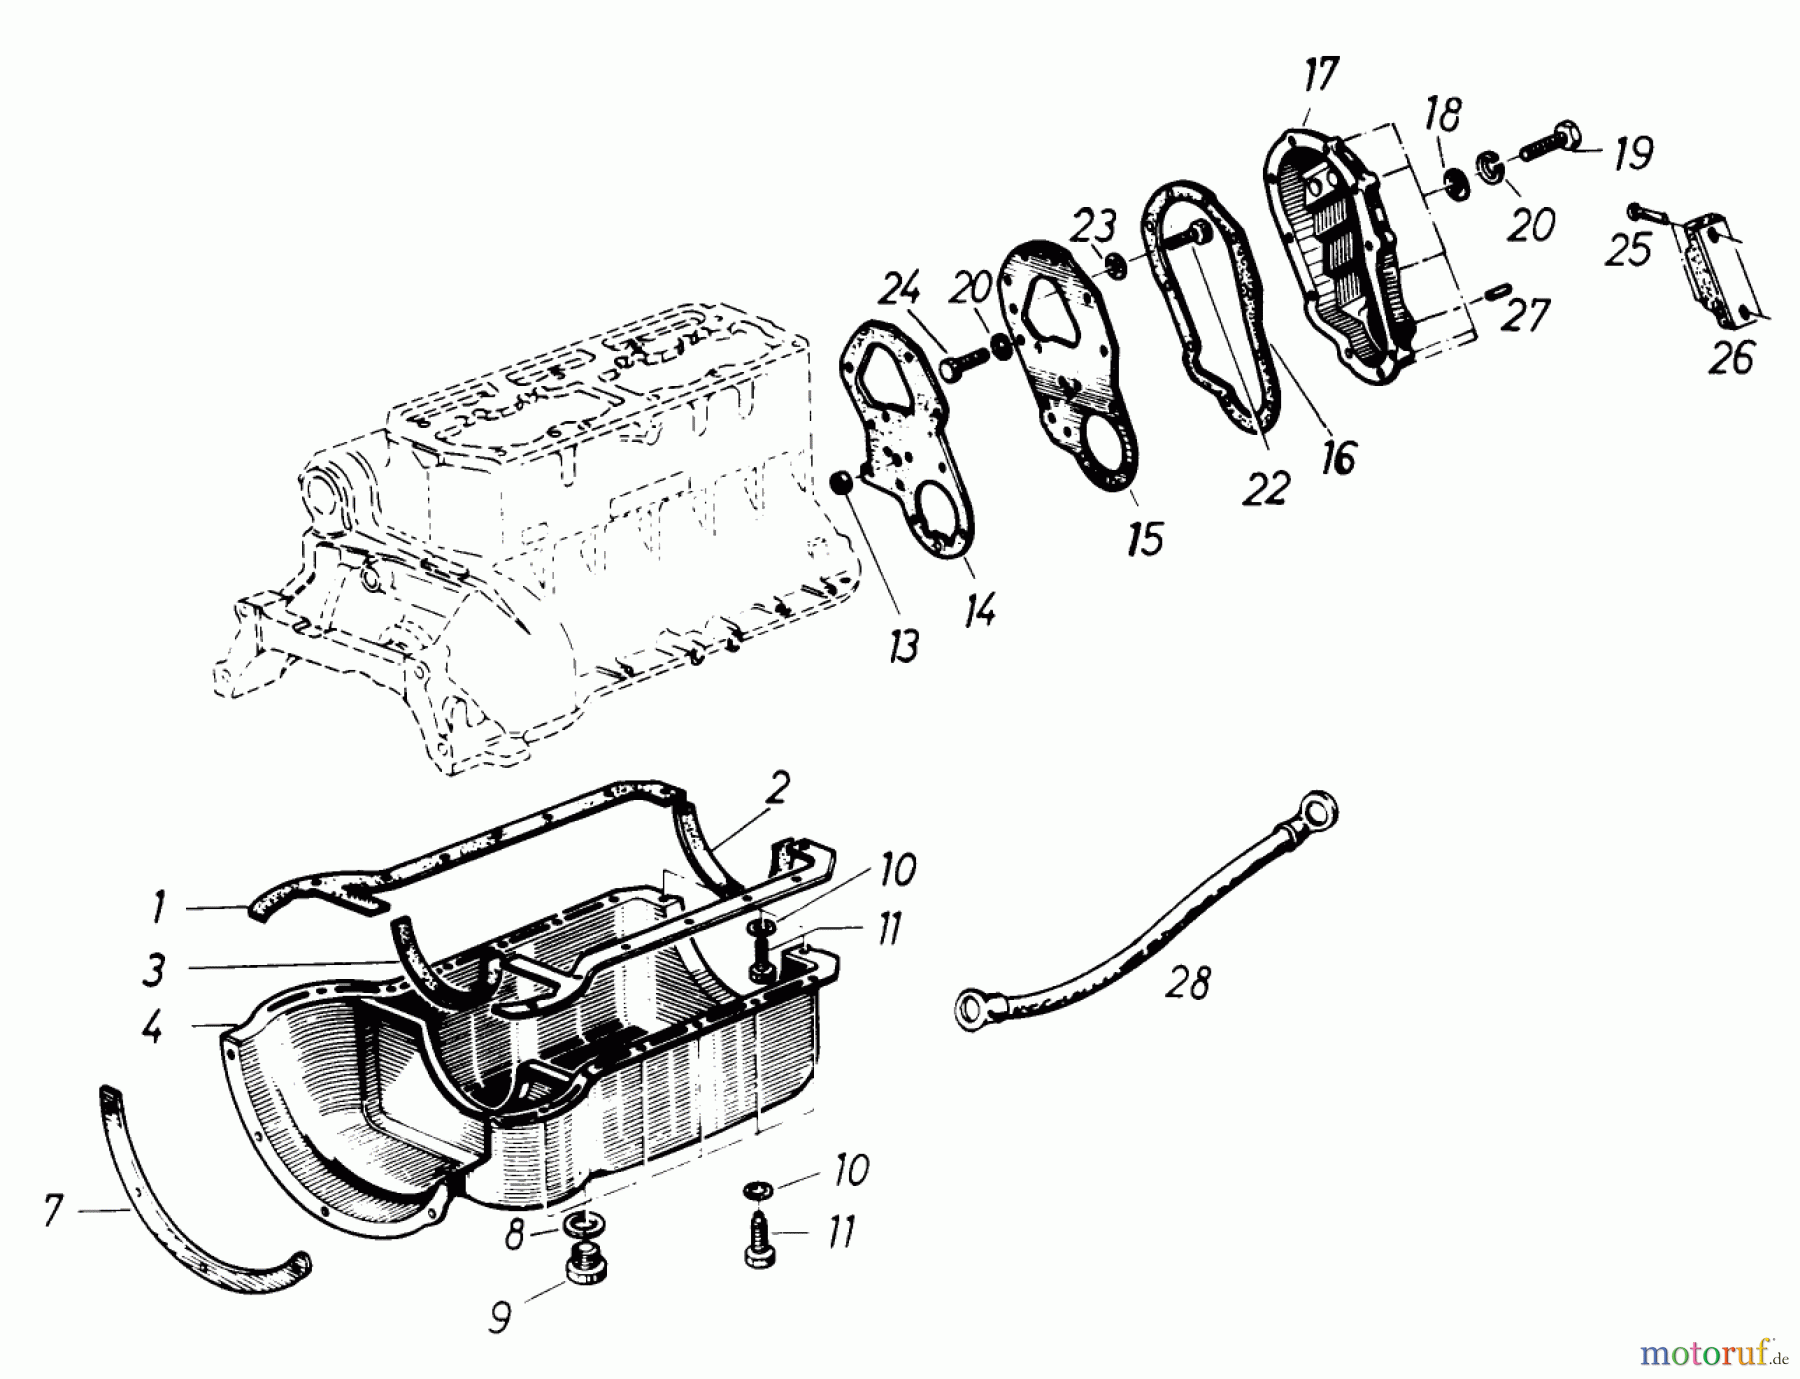  Toro Neu Mowers, Lawn & Garden Tractor Seite 1 61-20RG01 (D-250) - Toro D-250 10-Speed Tractor, 1976 OIL SUMP AND TIMING CHAIN COVER